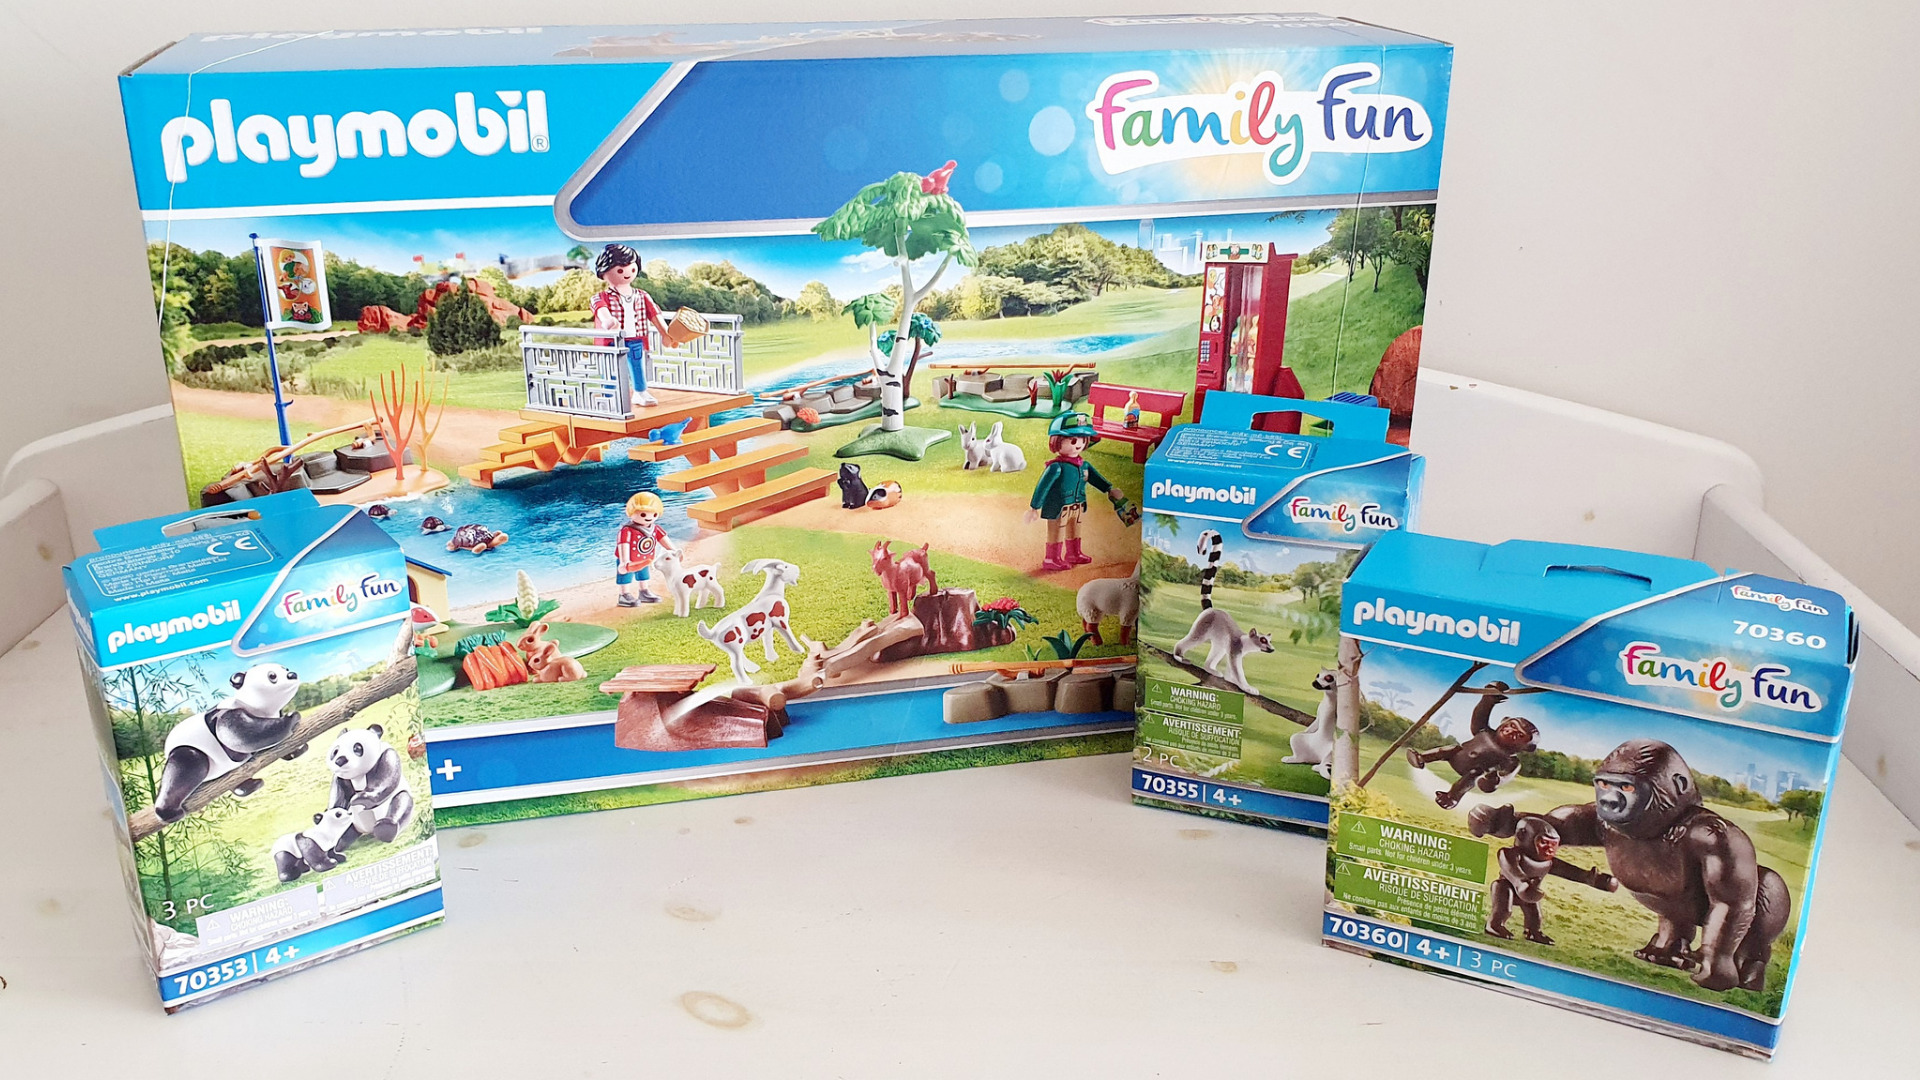 Playmobil fun zoo review - Of A Crummy